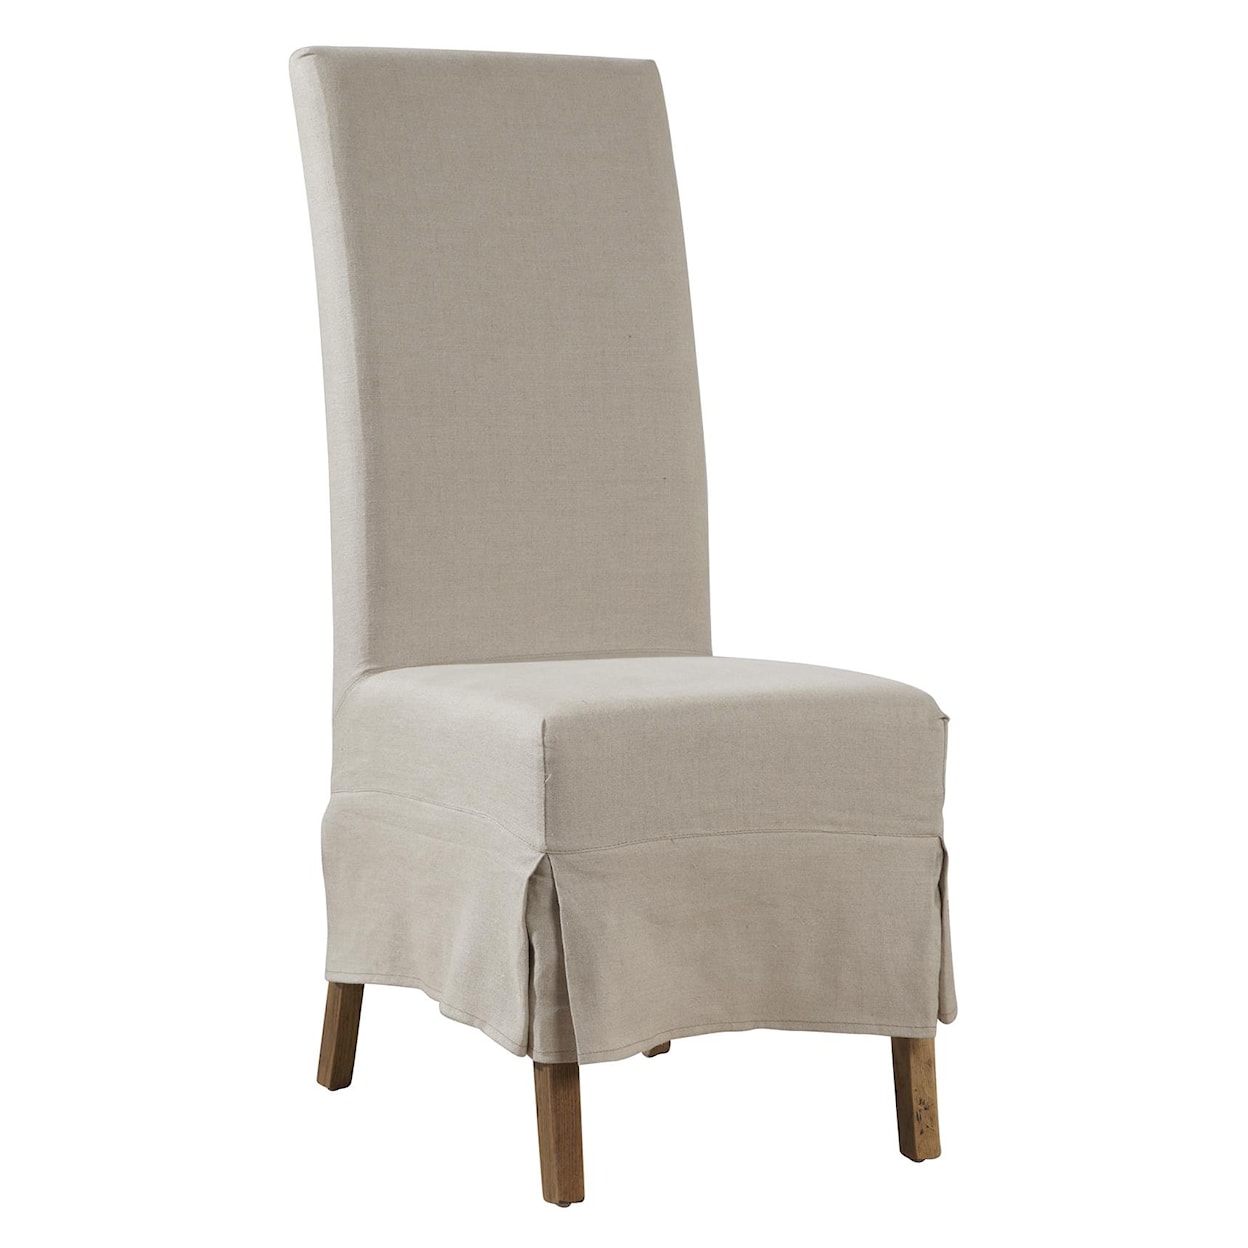 Furniture Classics Accents Linen Slip Covered Parsons Chair